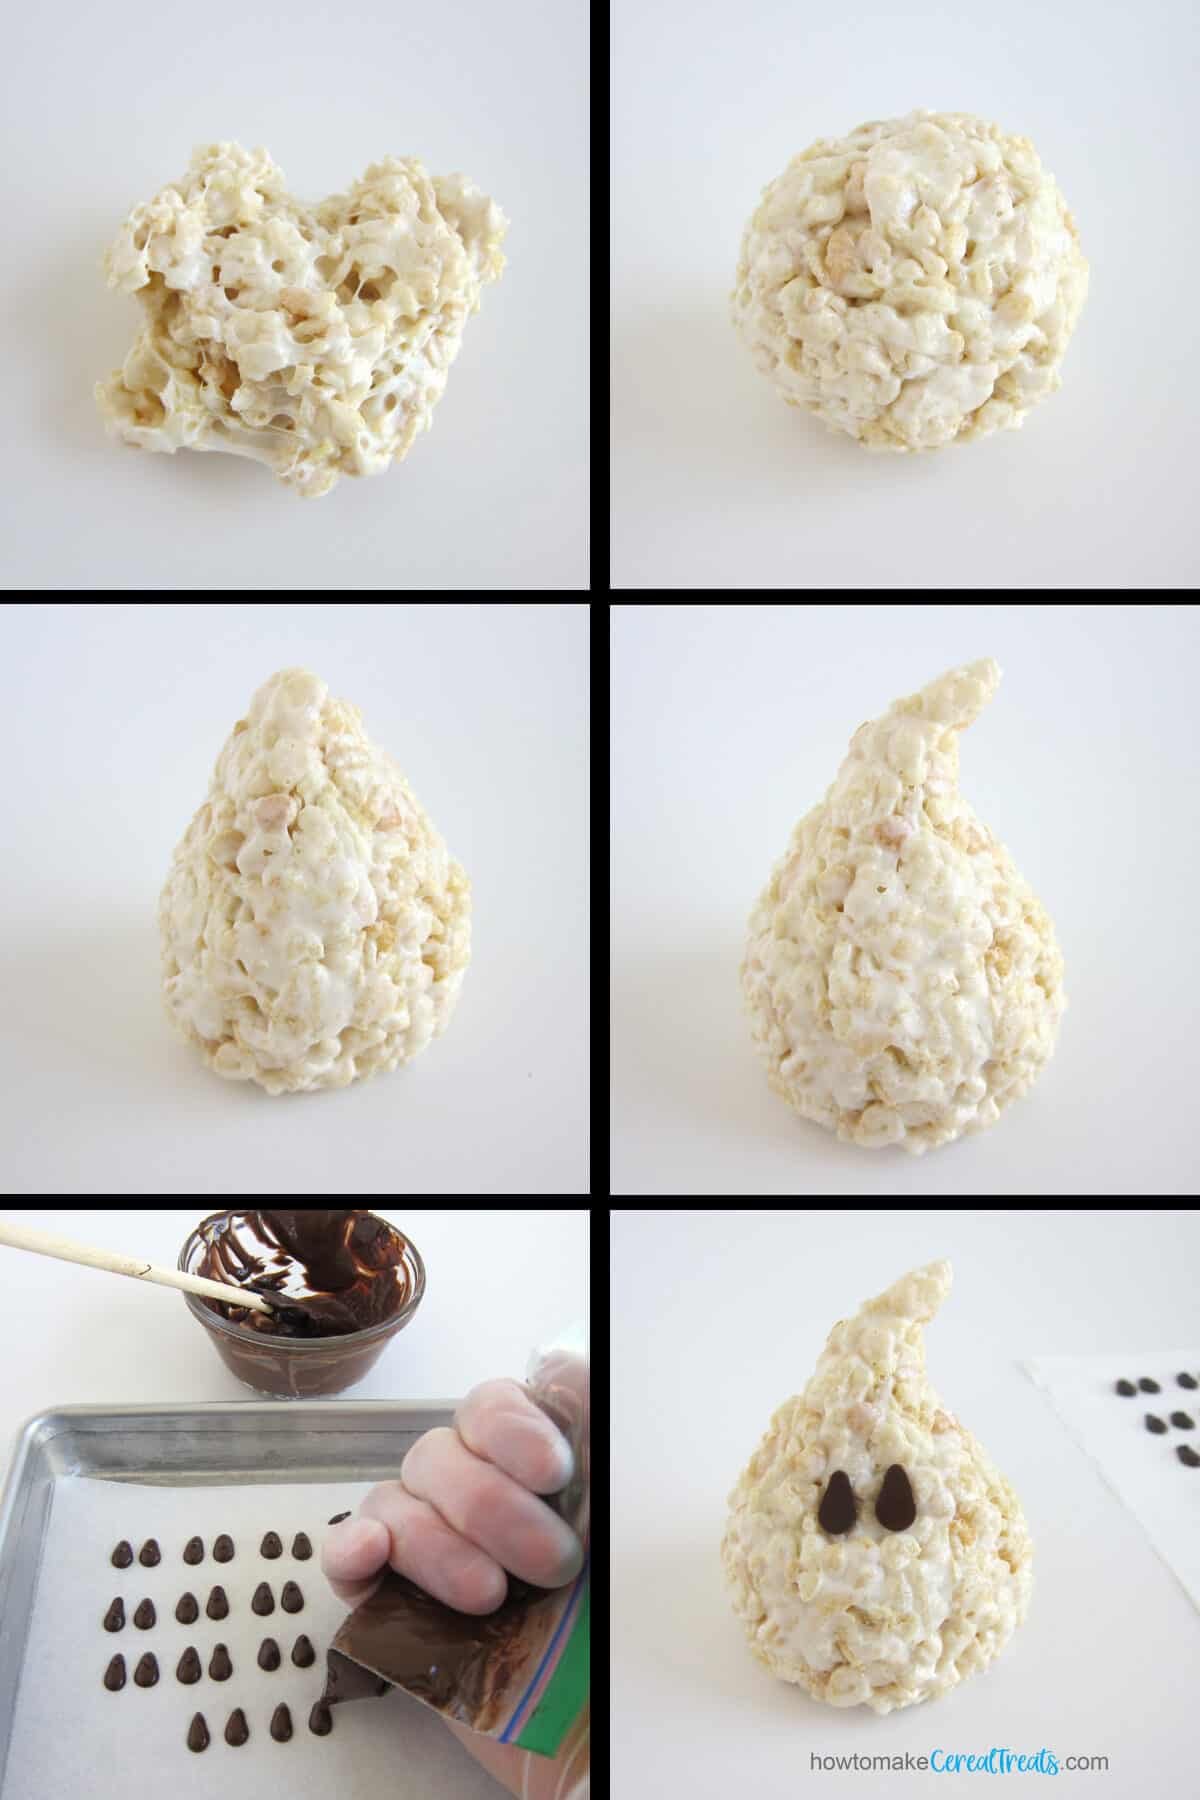 make rice krispie treat ghosts by shaping a ball of the marshmallow cereal treat into a tear drop then add chocolate eyes